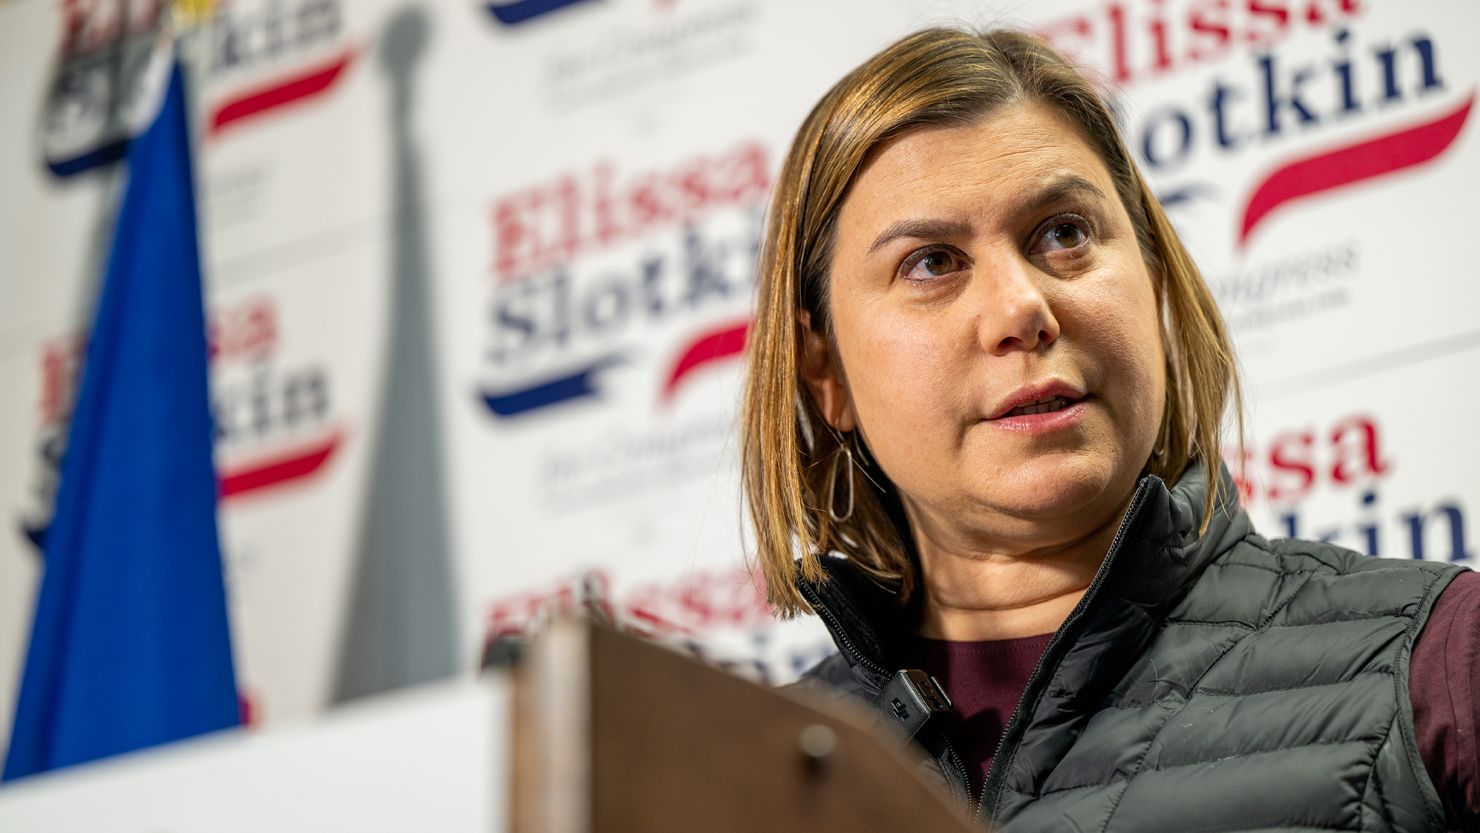 Rep. Elissa Slotkin speaks to reporters at a press conference on November 9, 2022 in East Lansing, Michigan.